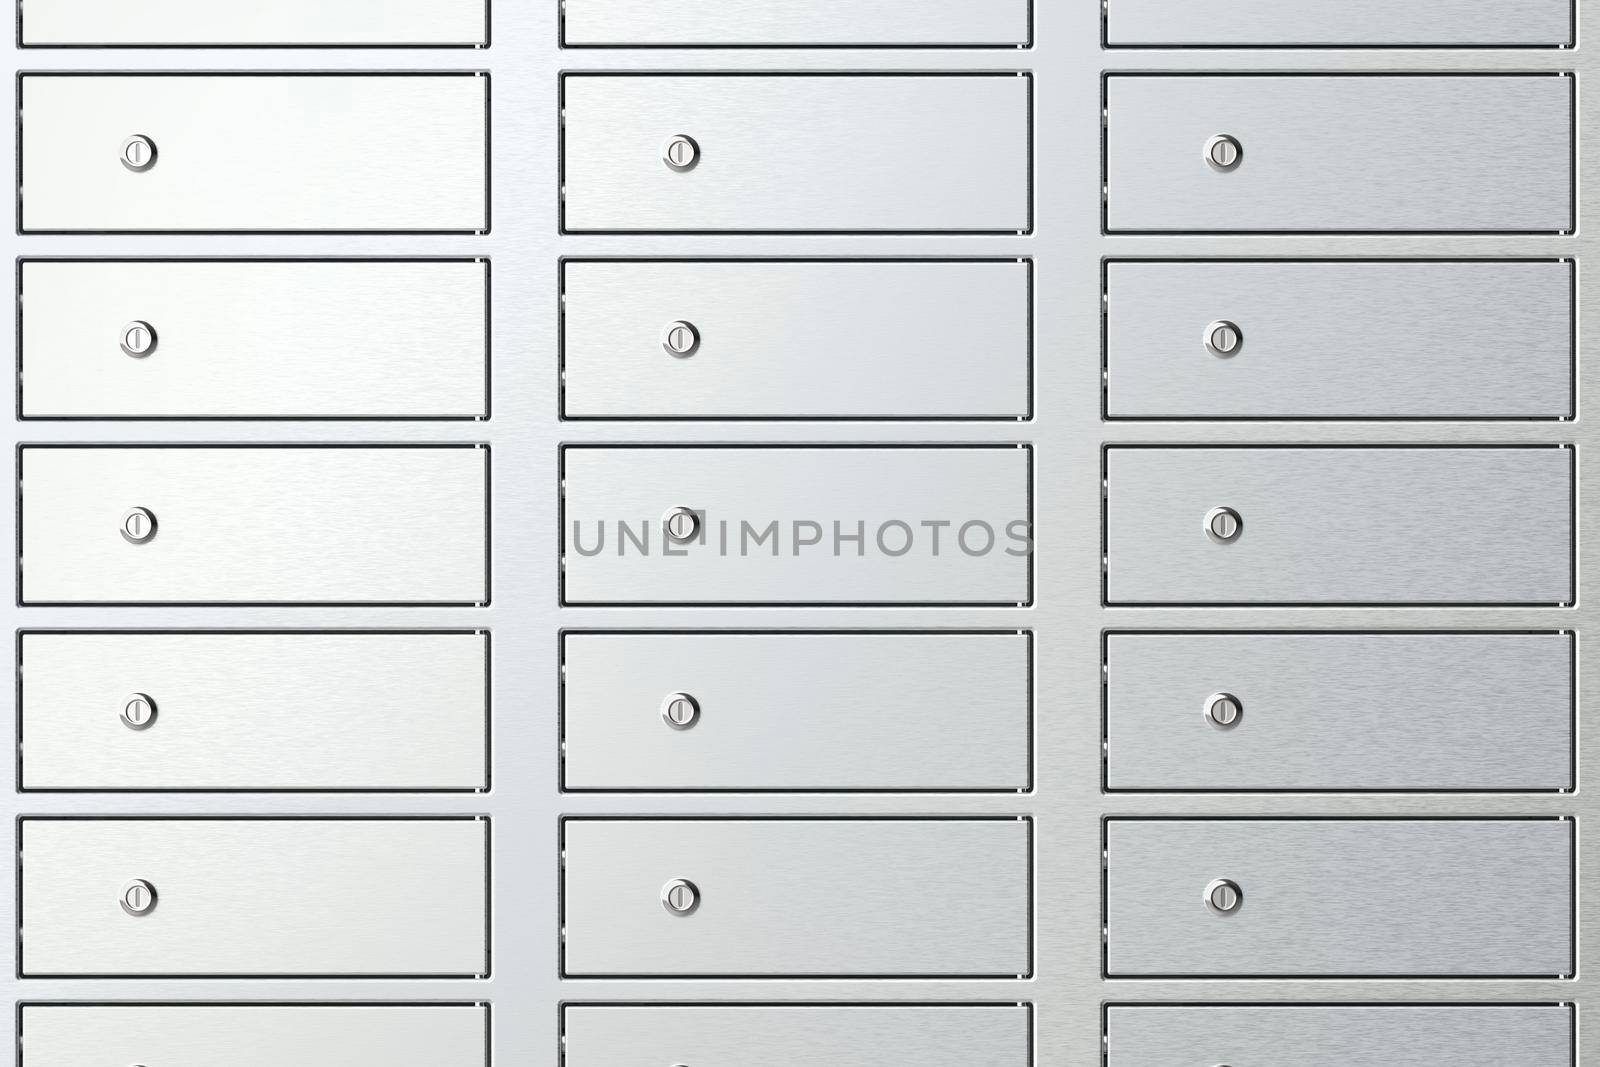 Safety deposit boxes in a bank